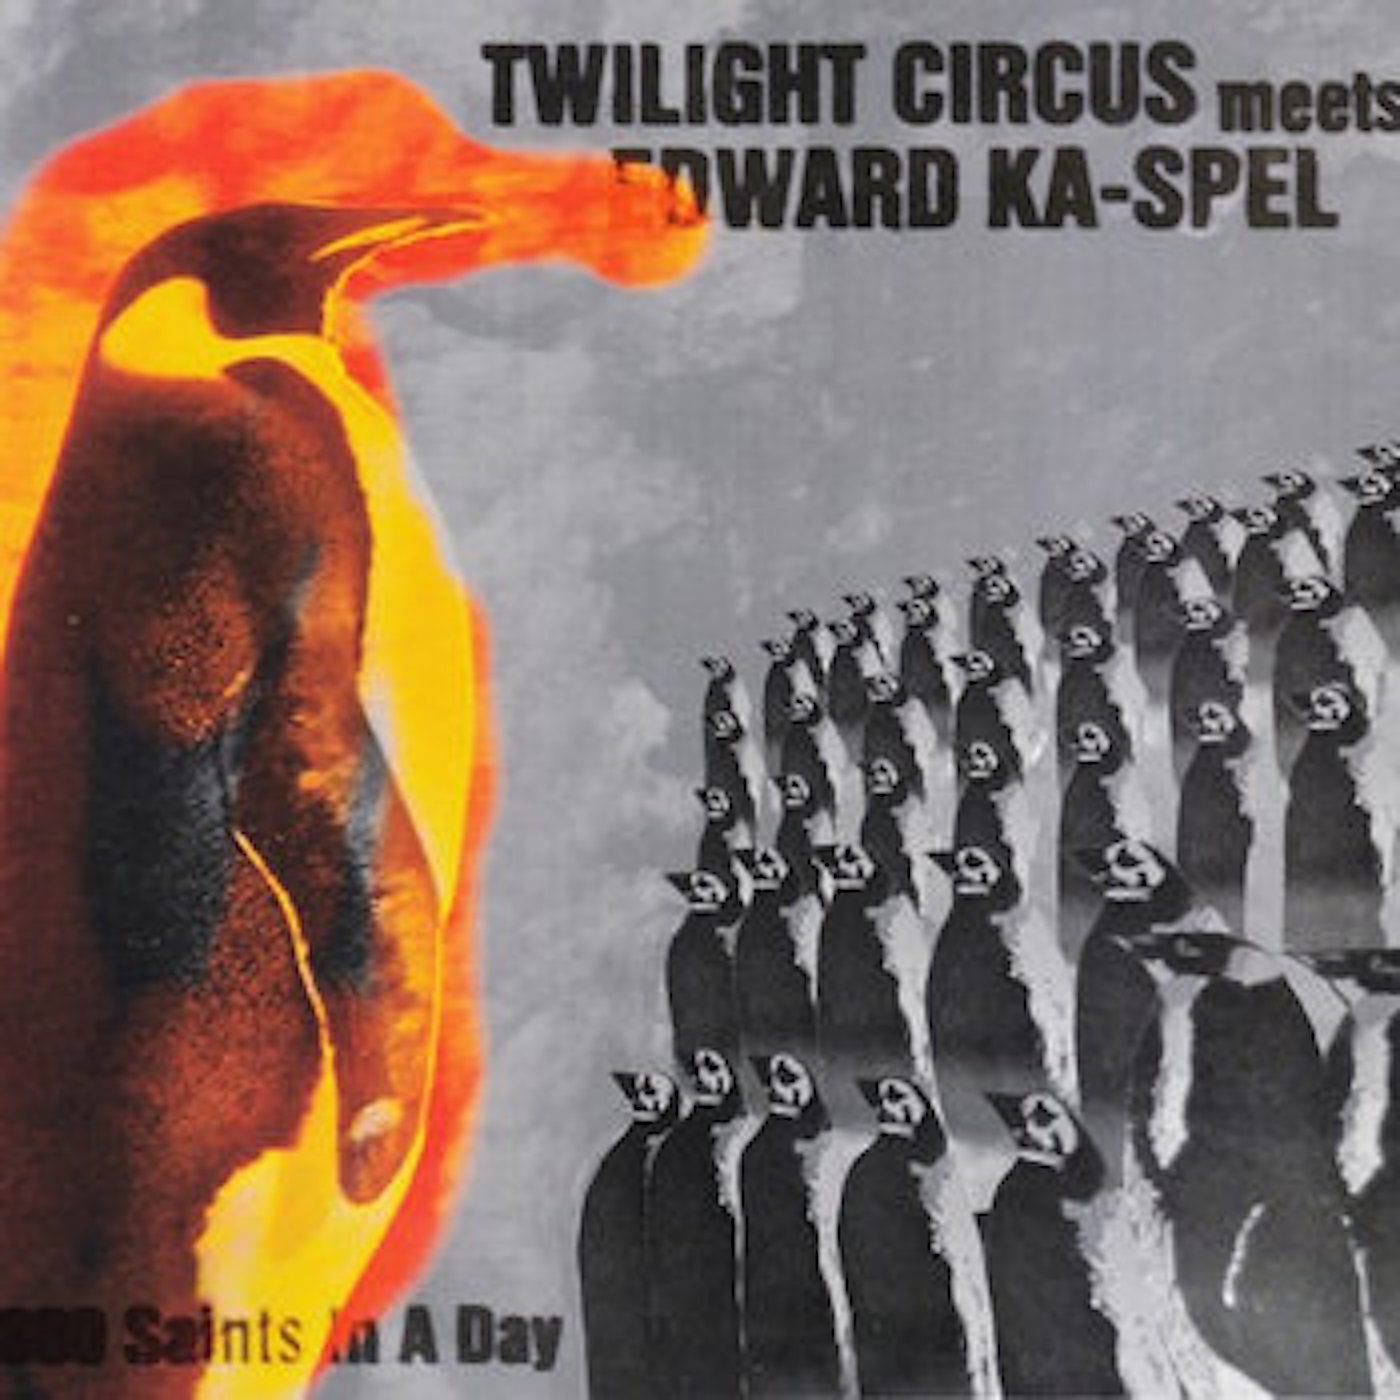 Twilight Circus Meets Edward Ka-Spel – 800 Saints In A Day (Enhanced and Expanded Edition) (2013/2018) [FLAC 24bit/44,1kHz]